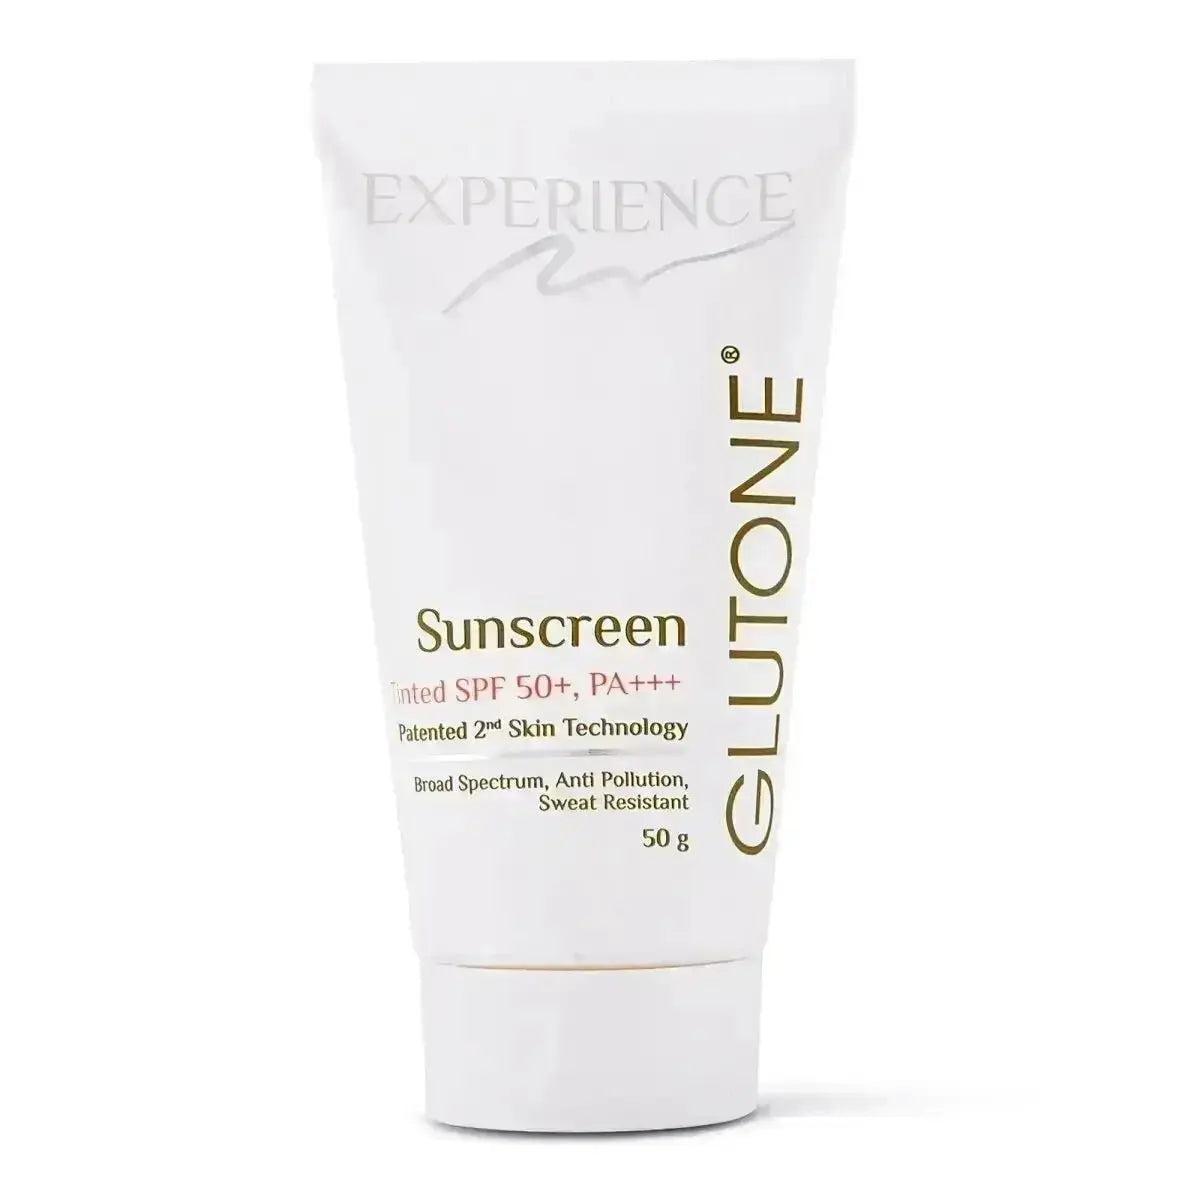 Glutone SPF 50+ PA+++ Tinted Sunscreen I 50 g I Patented 2nd Skin Technology I Daily Wear | Tinted | Broad Spectrum | Sweat Resistant I UVA/ UVB Protection